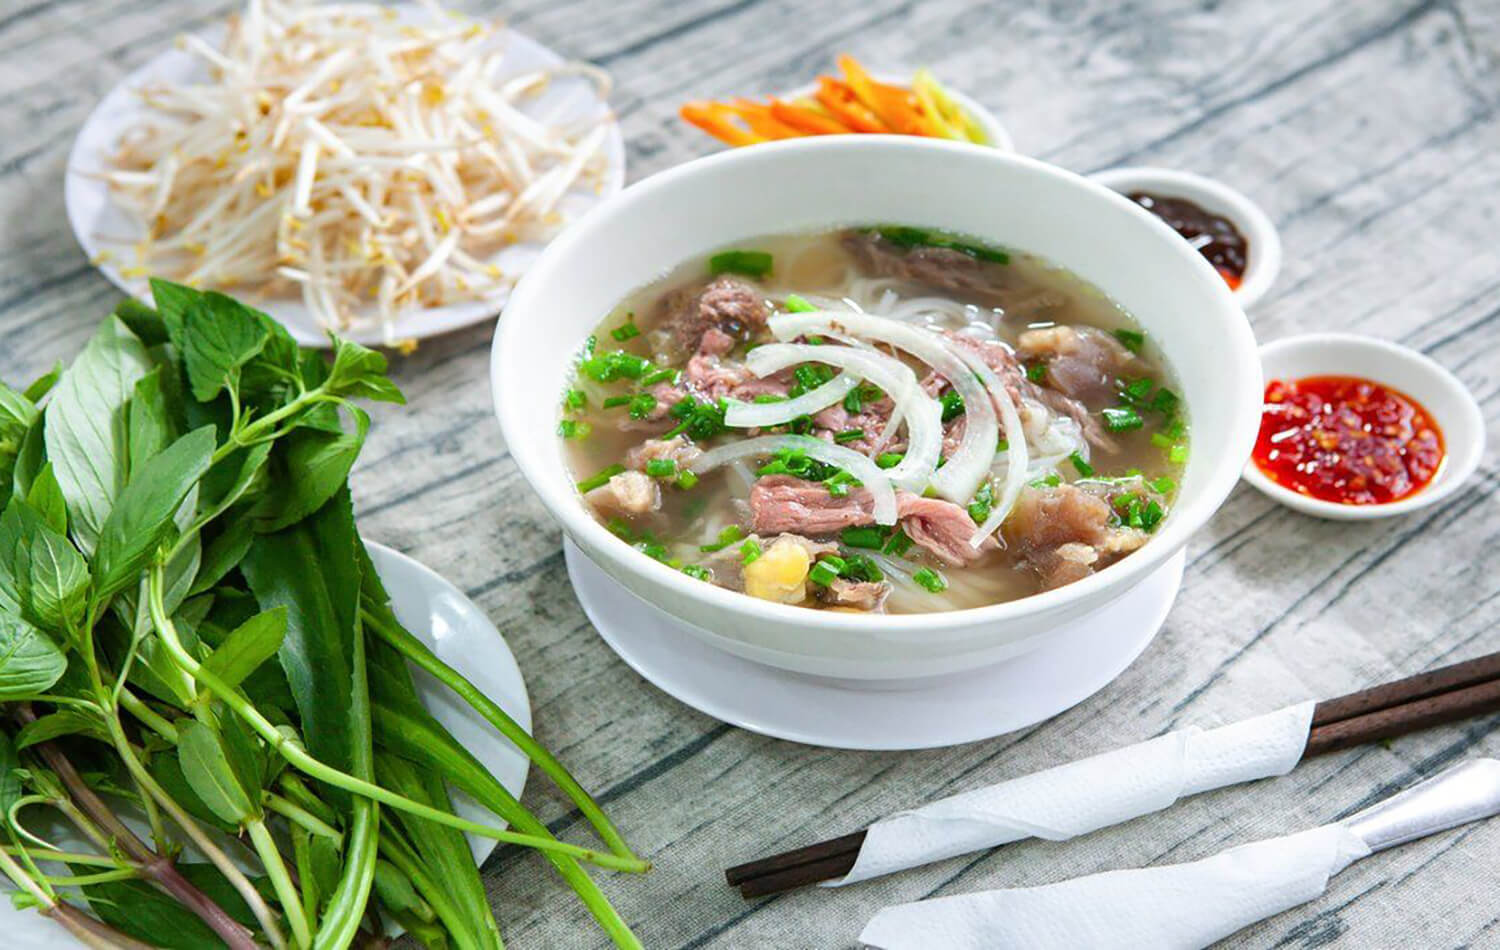 6 reasons why riding a motorcycle in Vietnam - delicious food